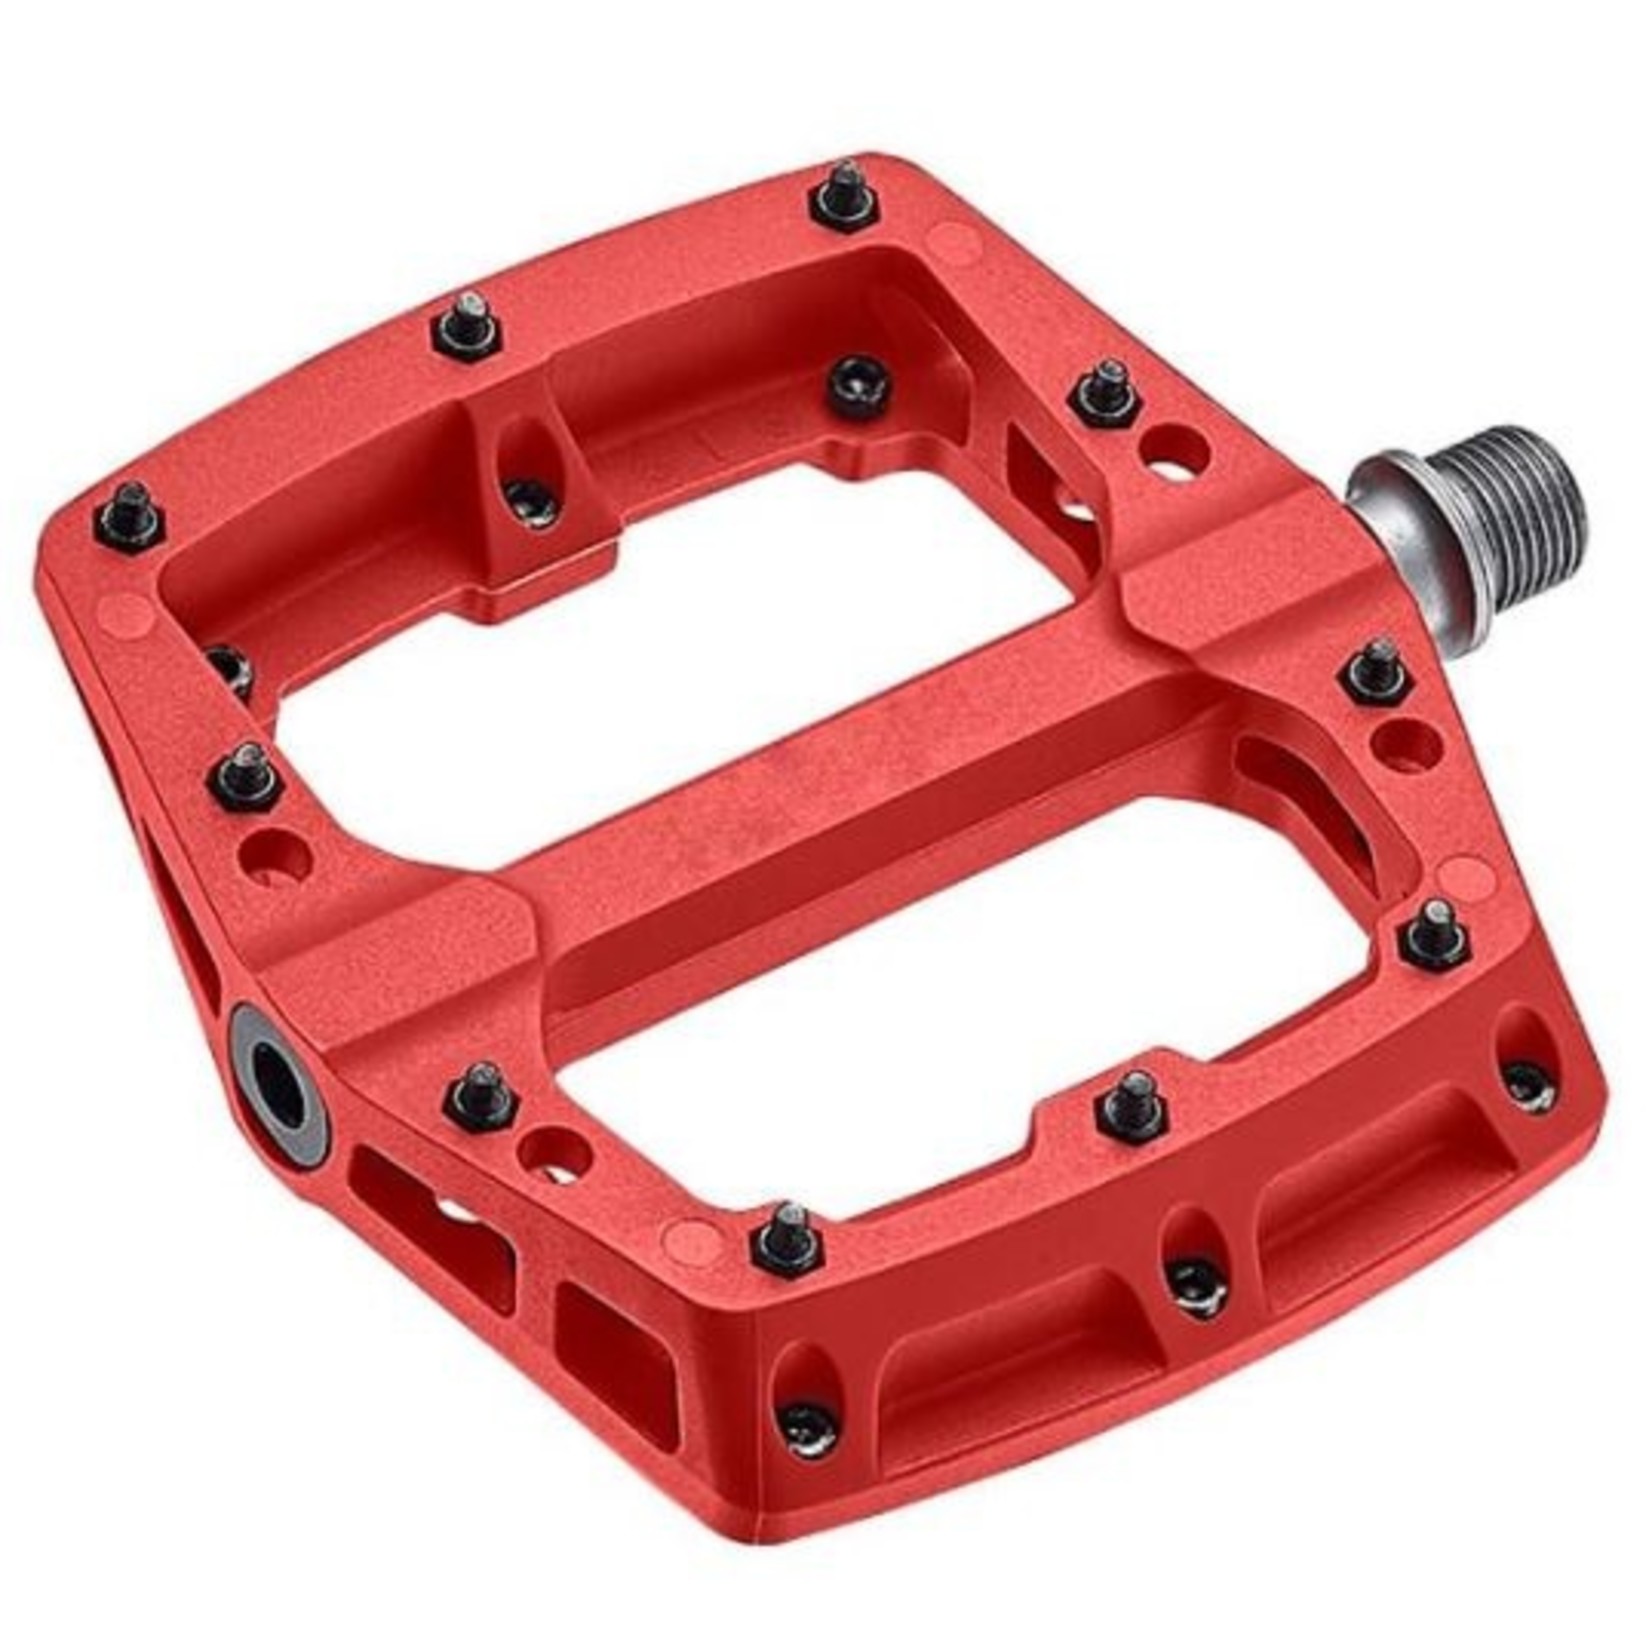 Ryfe Ryfe Bicycle Pedals - Ghost Rider - Sealed Bearing - Nylon Comp Body - Red